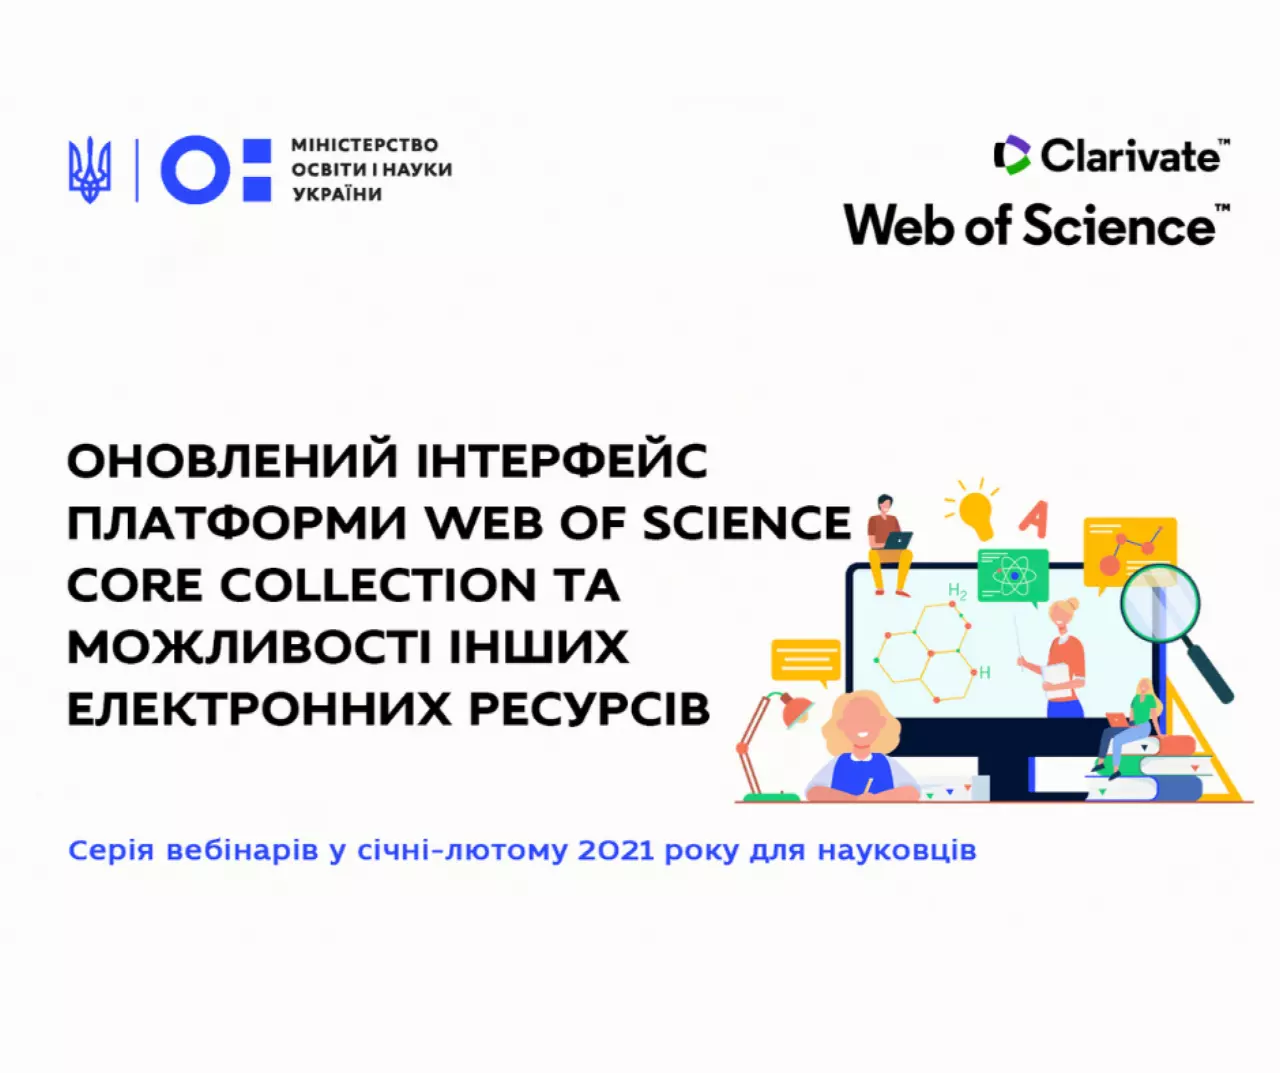 Scientist of Polytechnic Learned about New Possibilities in Digital Scientific Communication